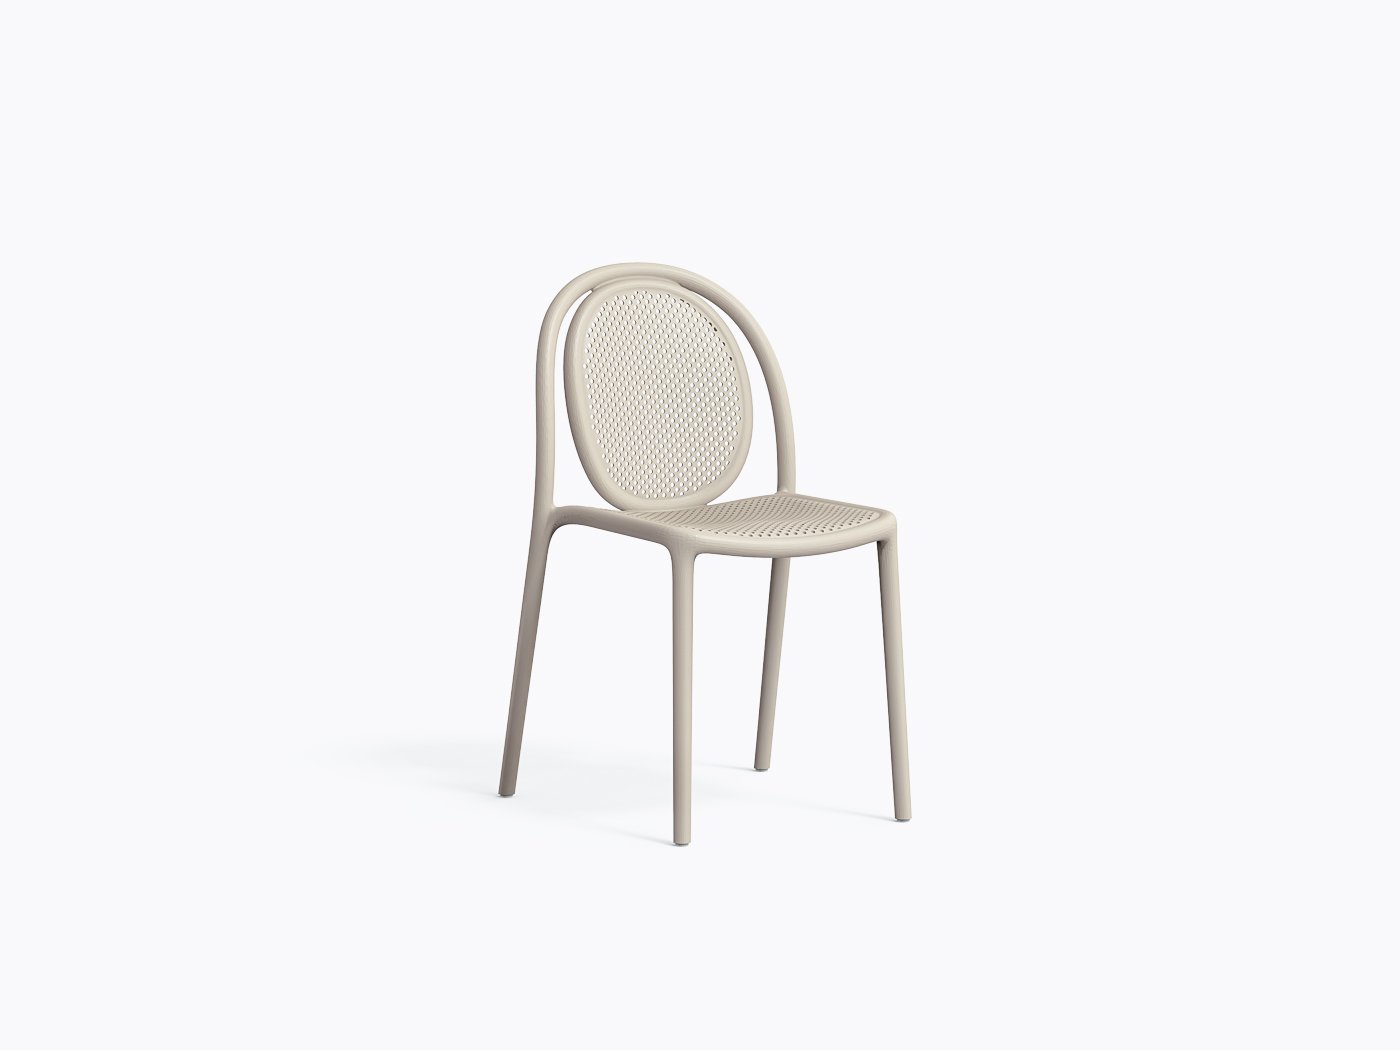 Remind 3730 Chair - Grey BE